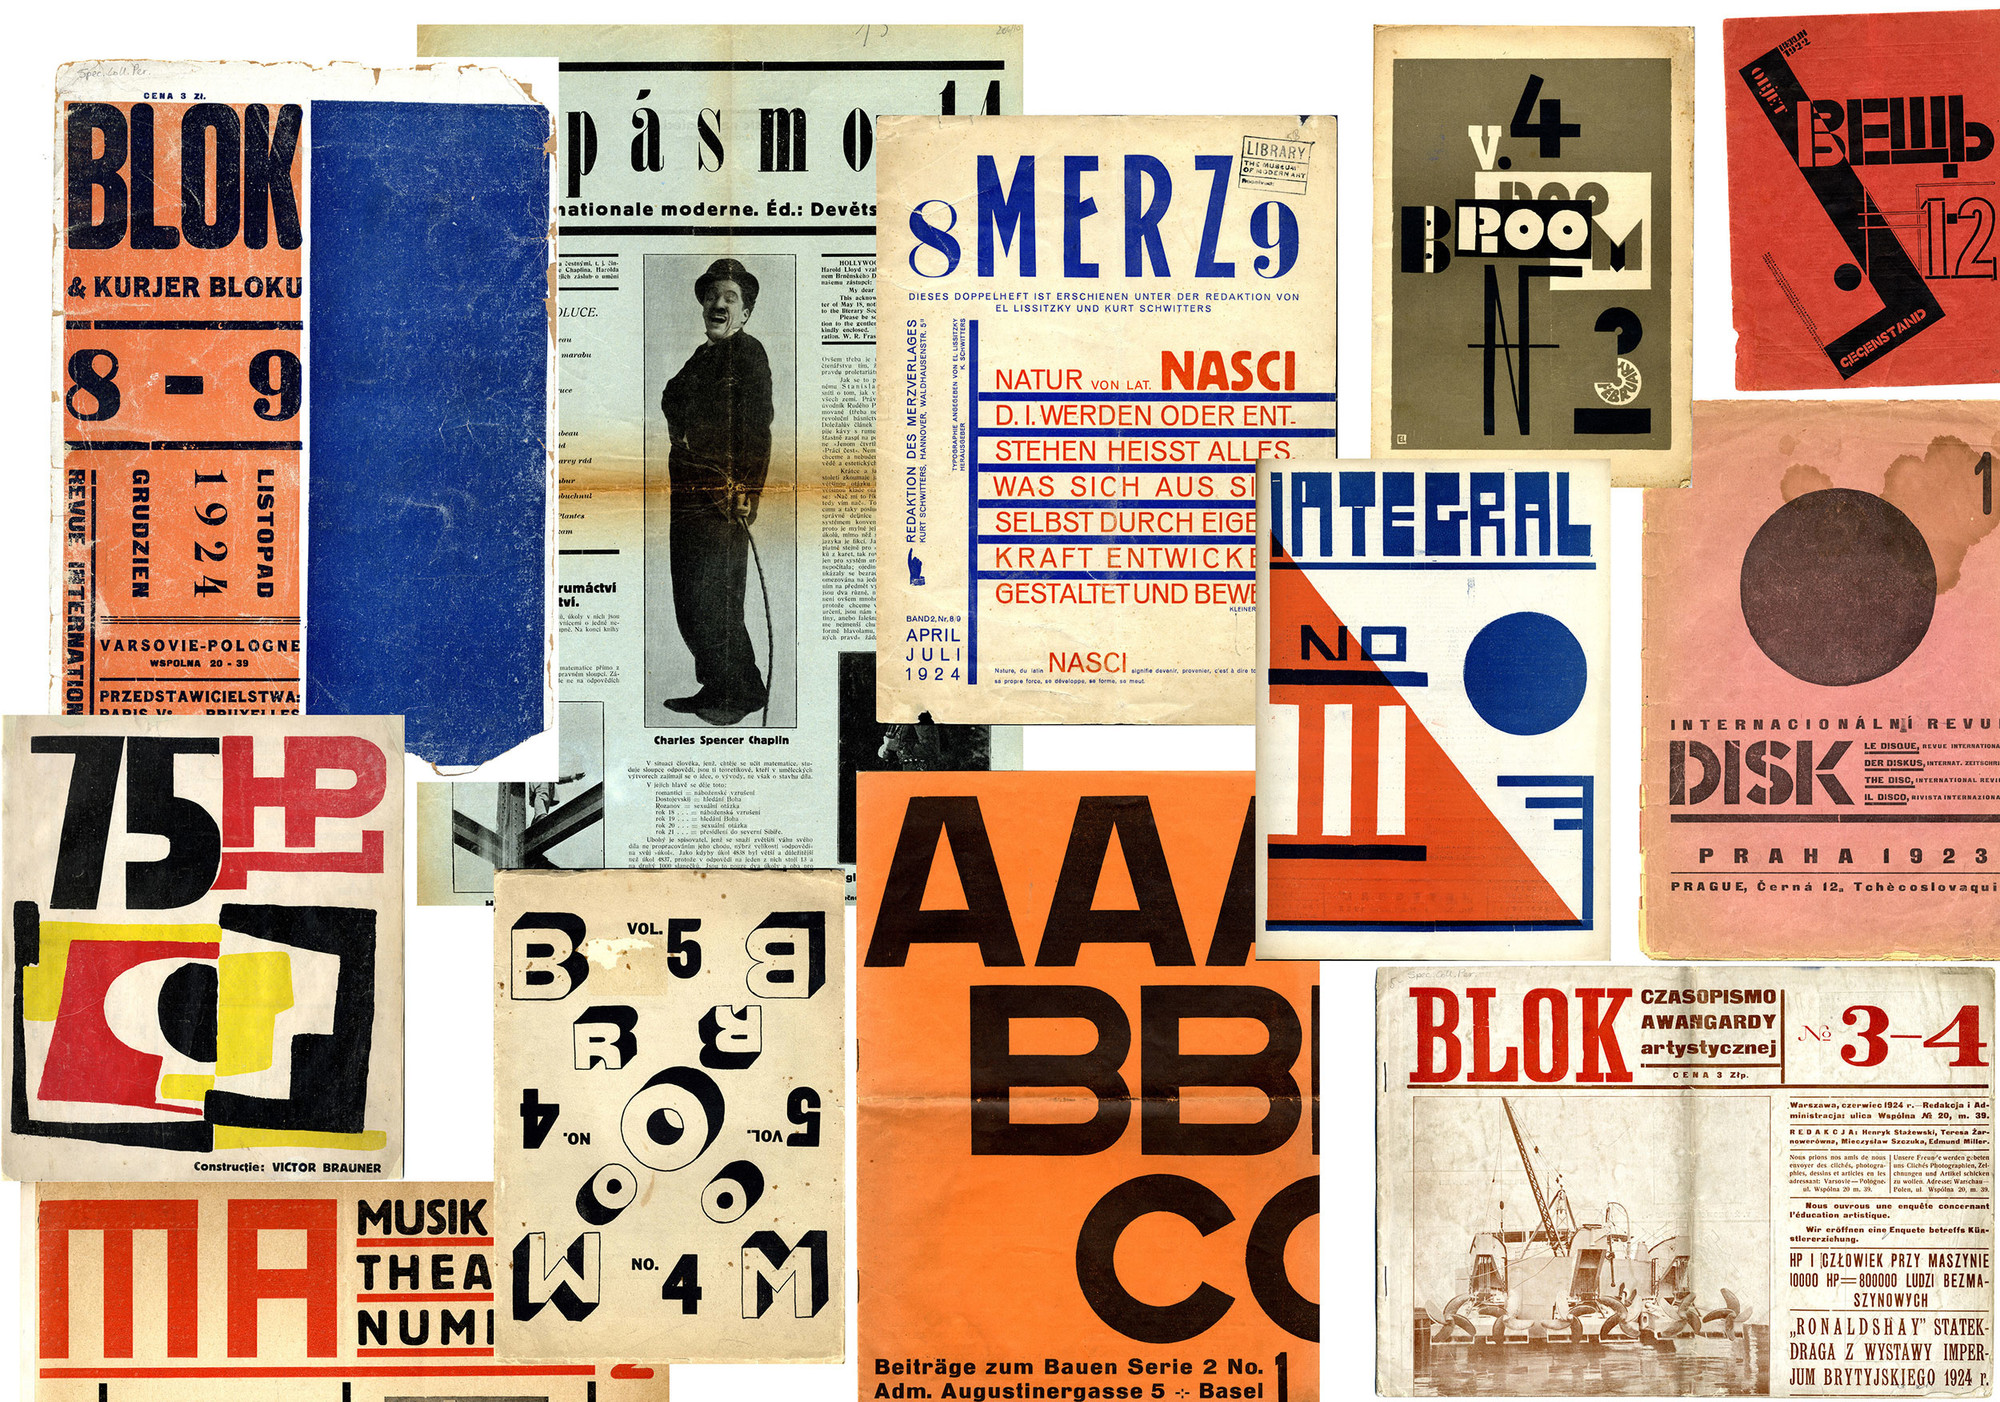 THE ELECTRO-LIBRARY: European Avant-Garde Magazines from the 1920s 